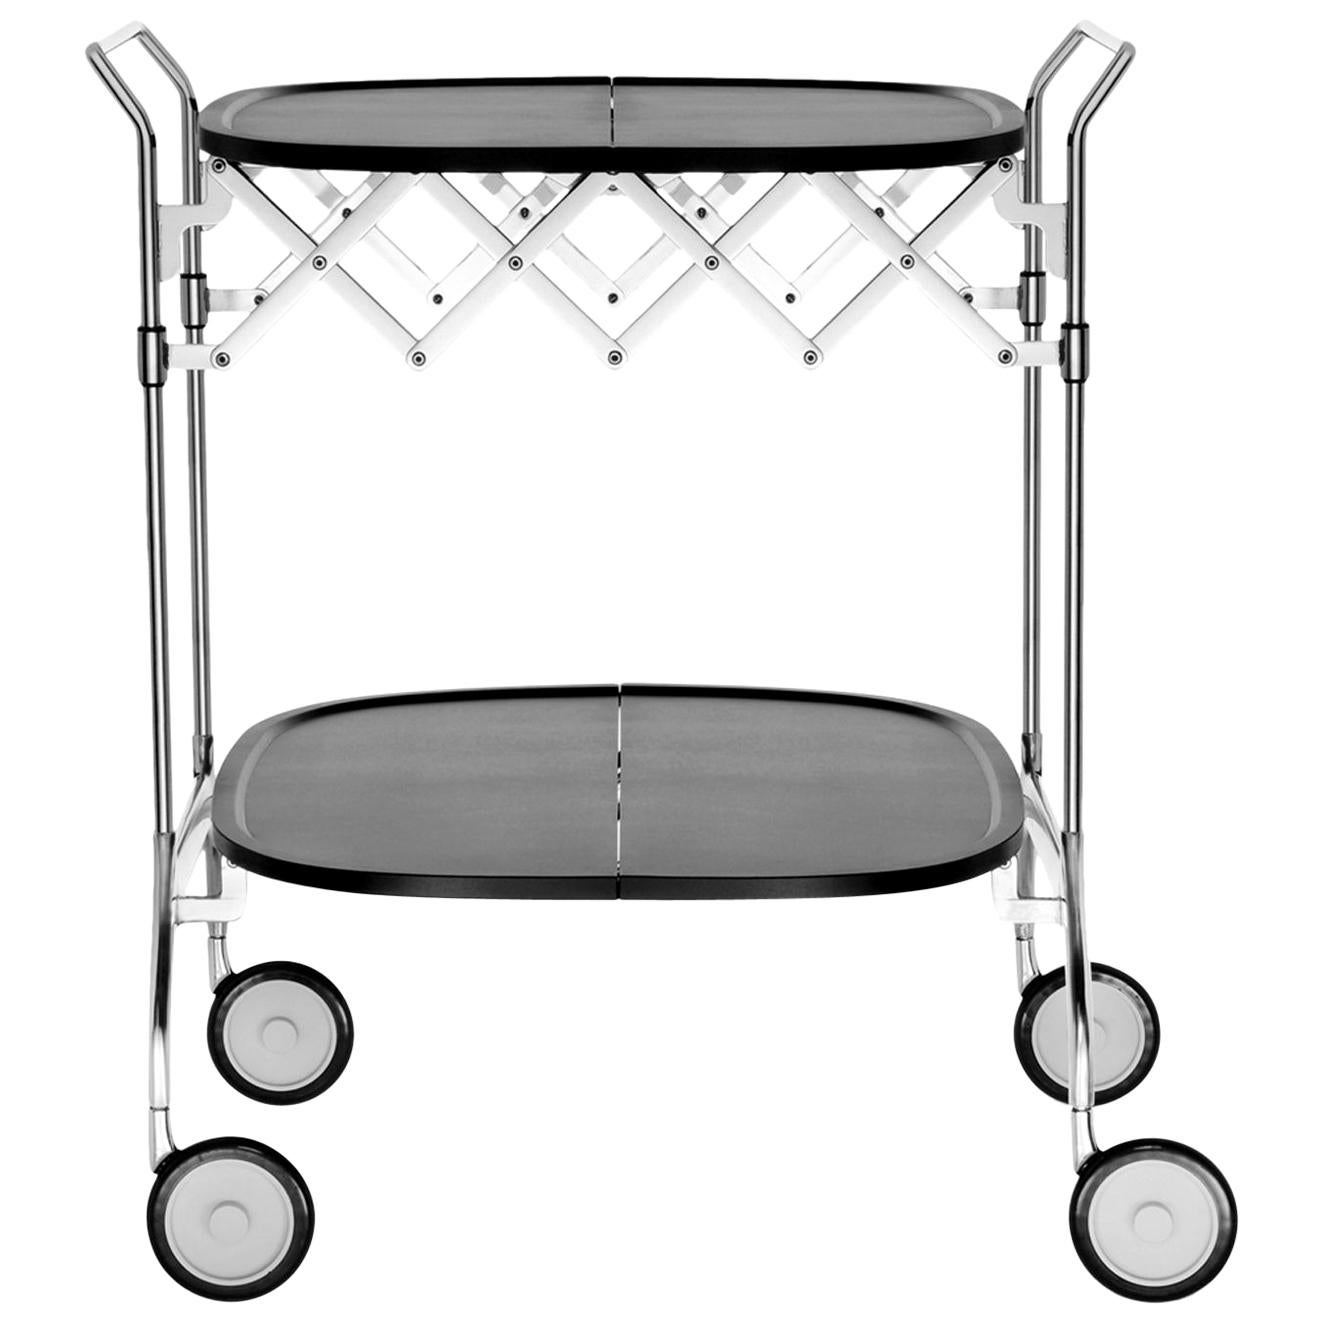 Kartell Gastone Trolley in Black by Antonio Citterio & Oliver Löw For Sale